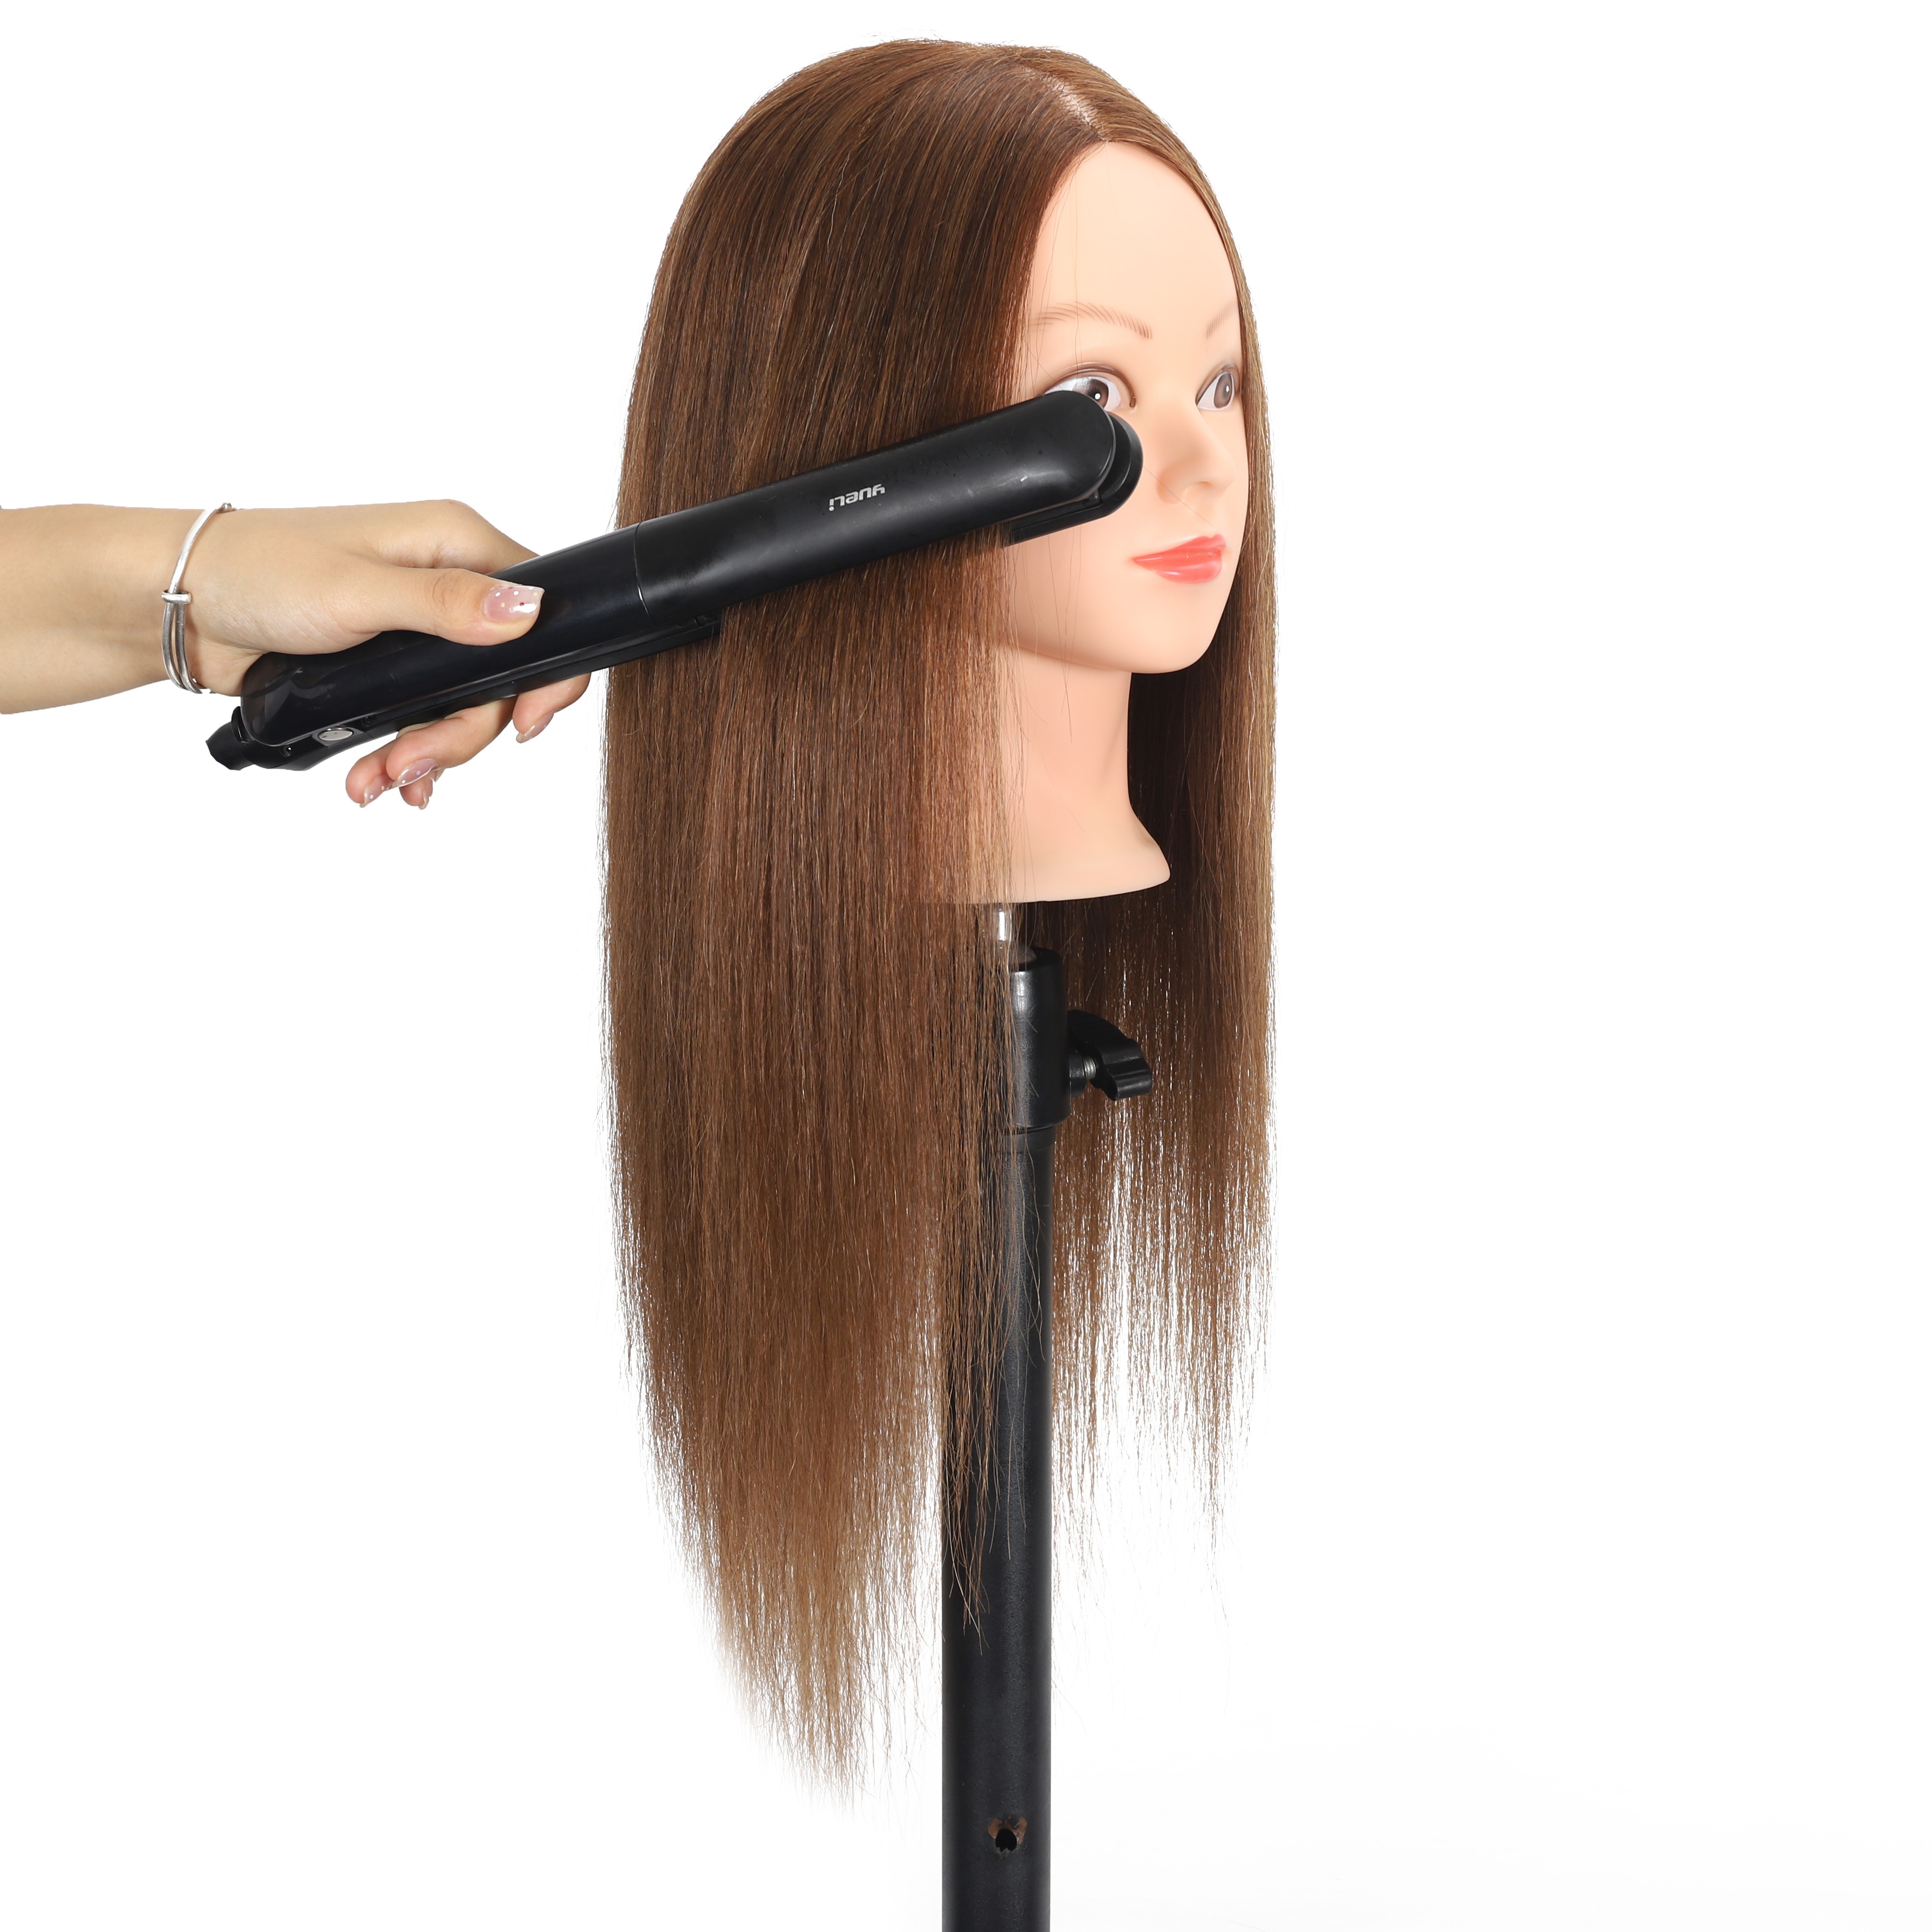 100% Real Hair Mannequin Head With Human Hair Hairdresser